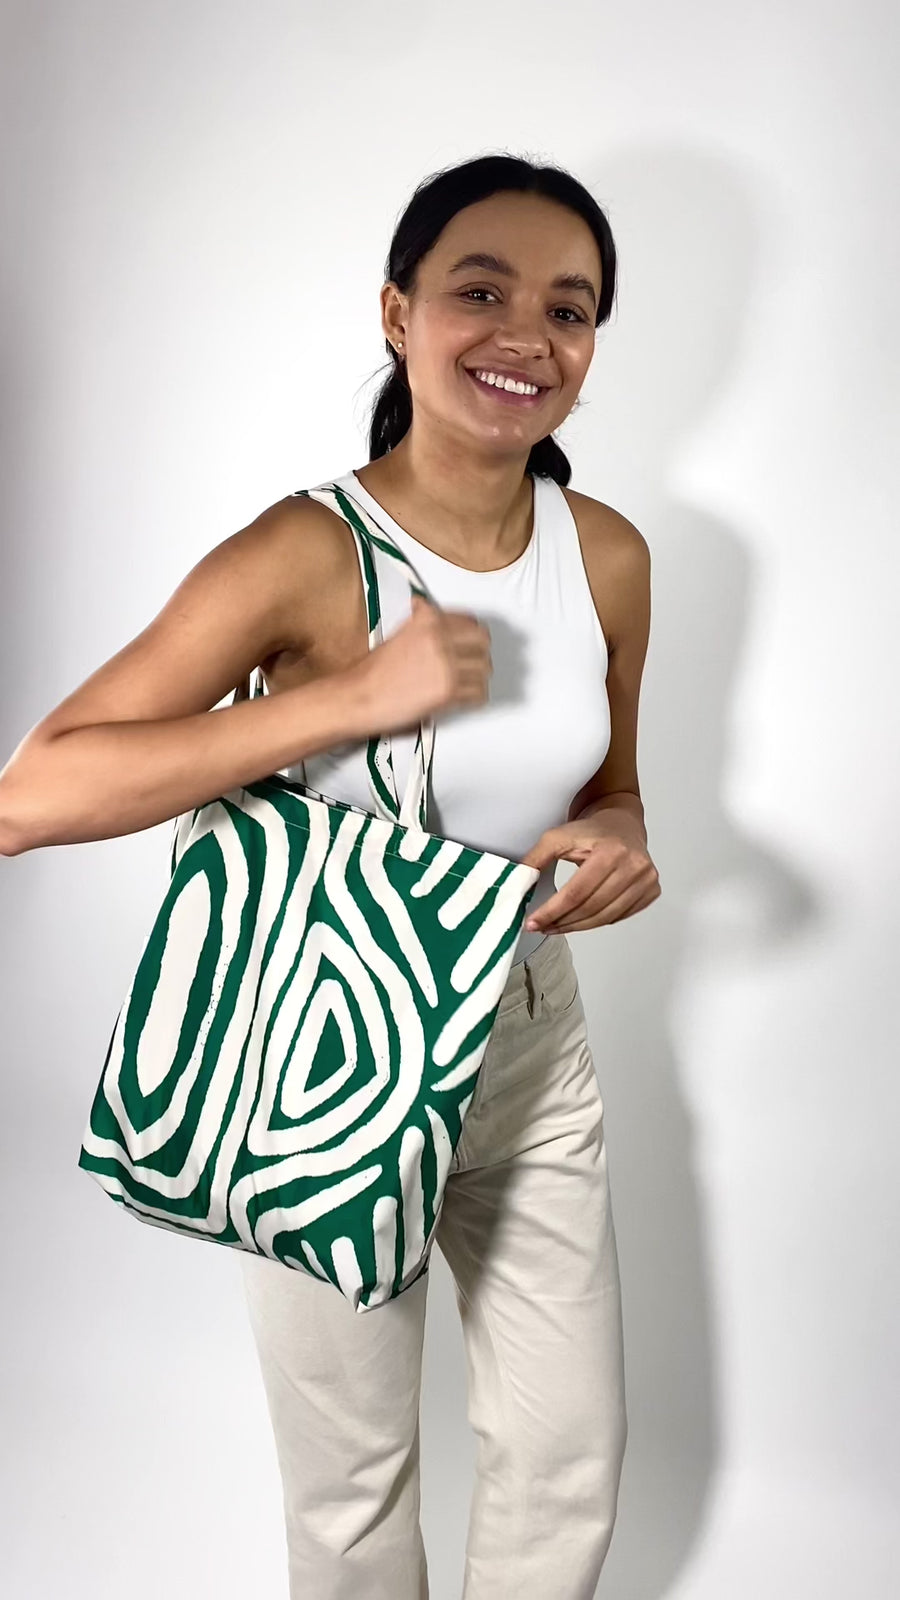 Lime Green Gingham | Recycled Tote